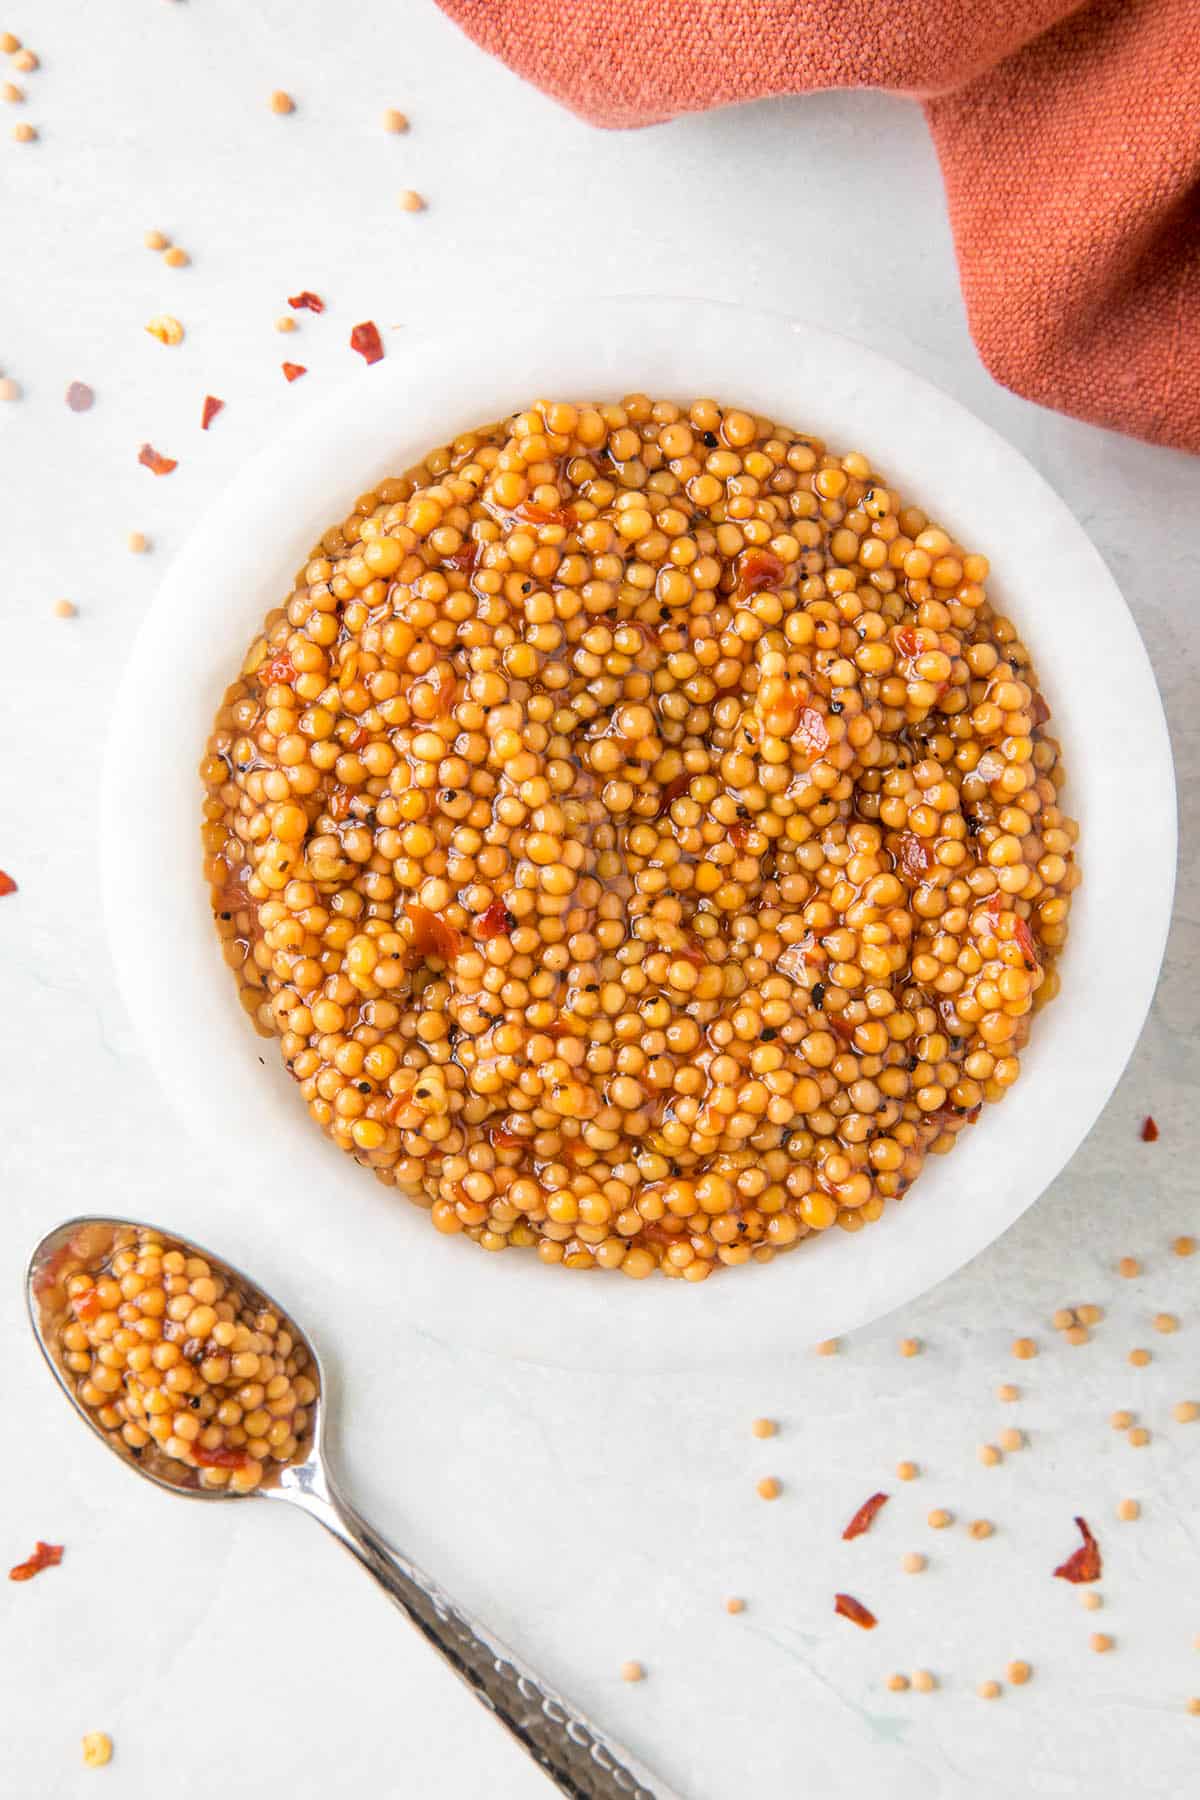 Pickled Mustard Seeds with a spoonful of plump, flavor seeds